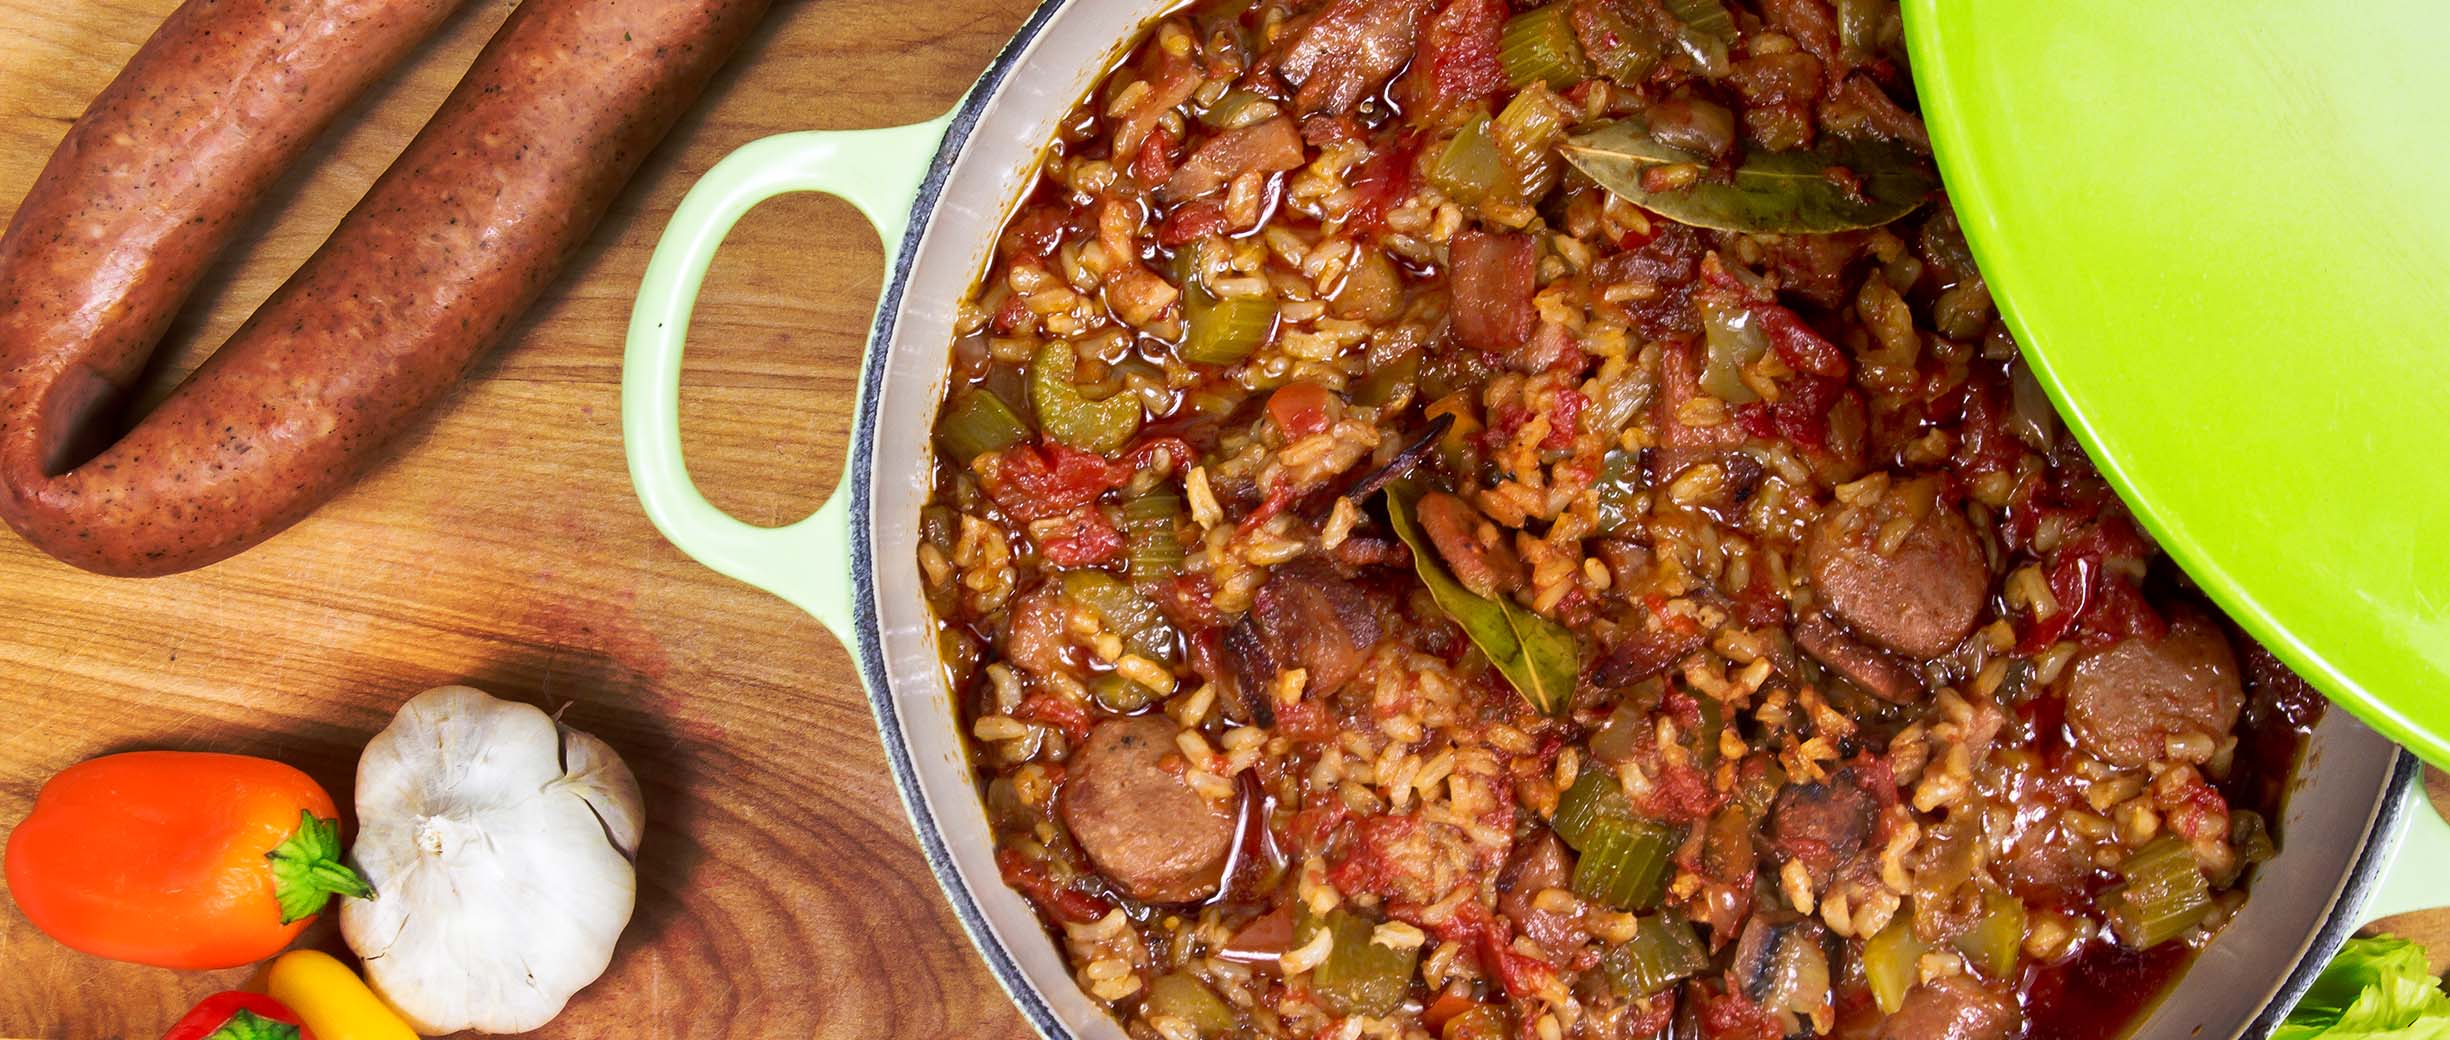 25 Ways to Eat Smoked Sausage for Dinner